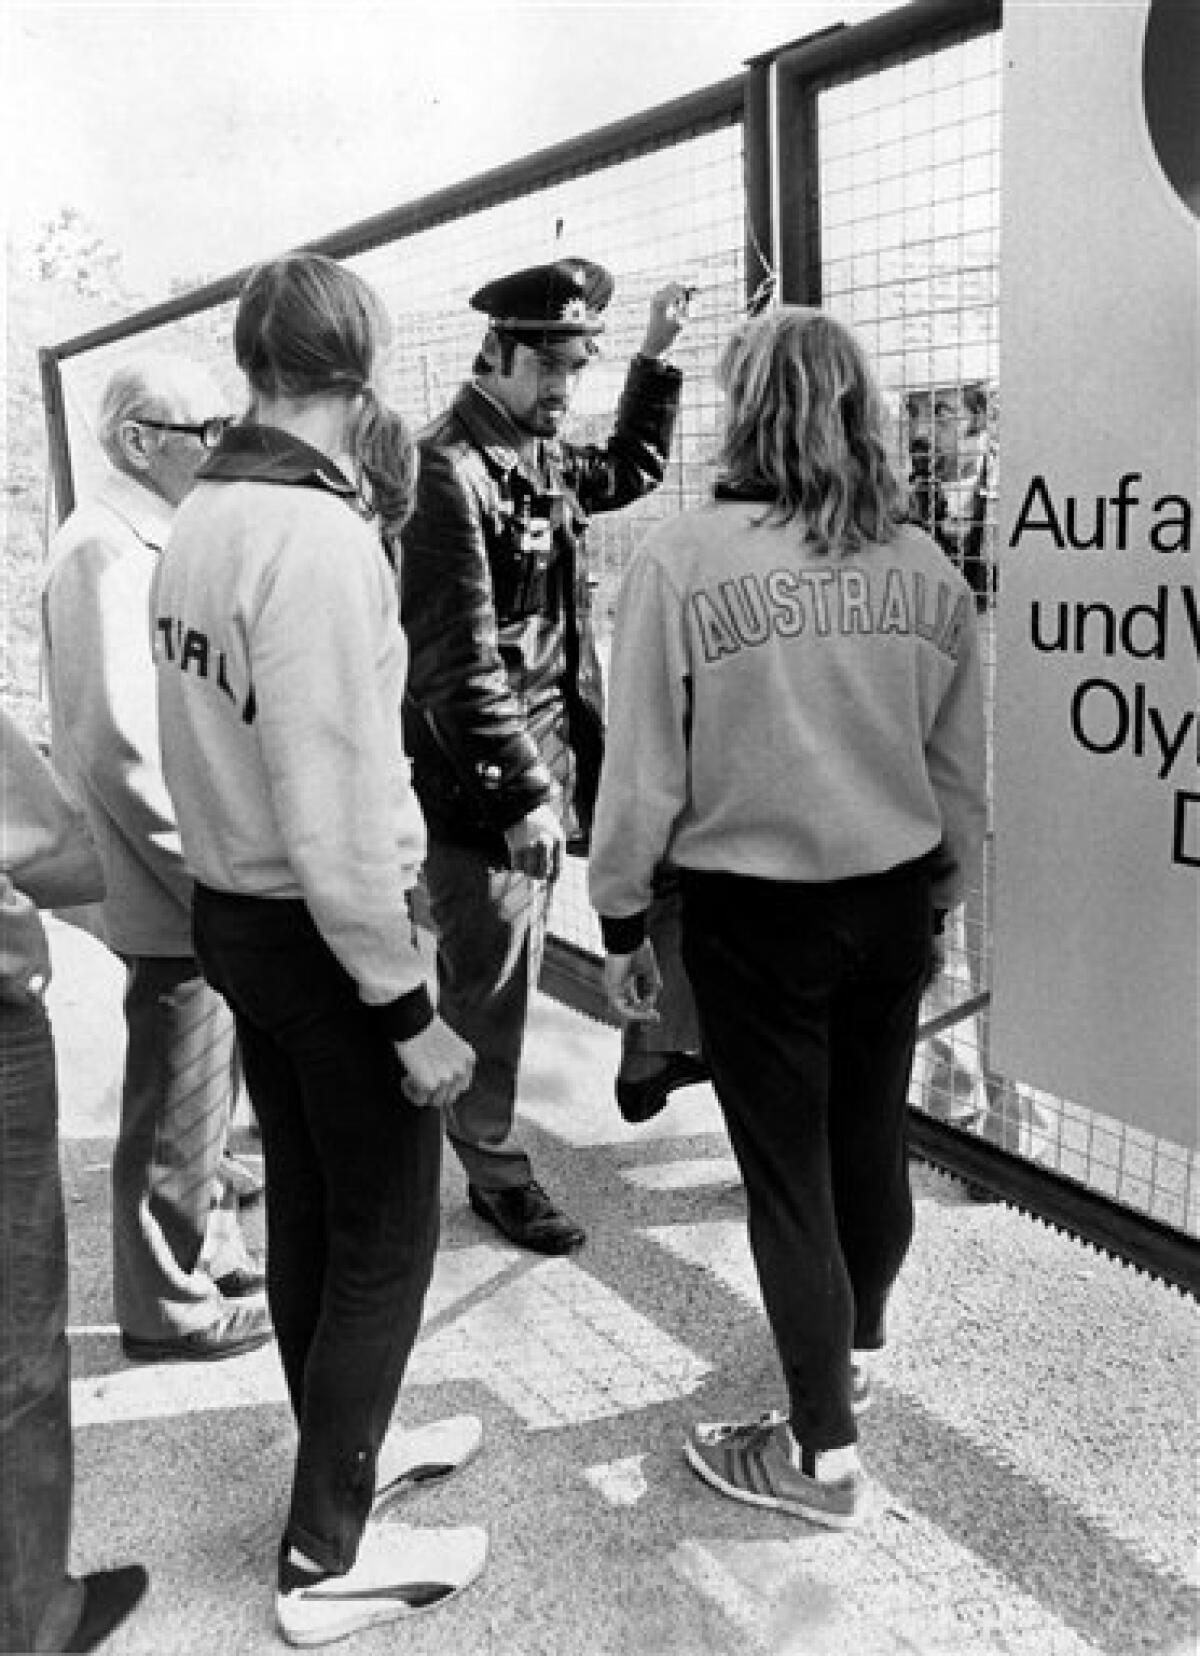 FILE - In this Sept. 5, 1972, file photo, a police officer blocks the entrance gate of the Olympic village in Munich, as two Australian athletes returning from early training try to get access. Doors were blocked following members of Israel's delegation taken hostage earlier. (AP Photo/File)